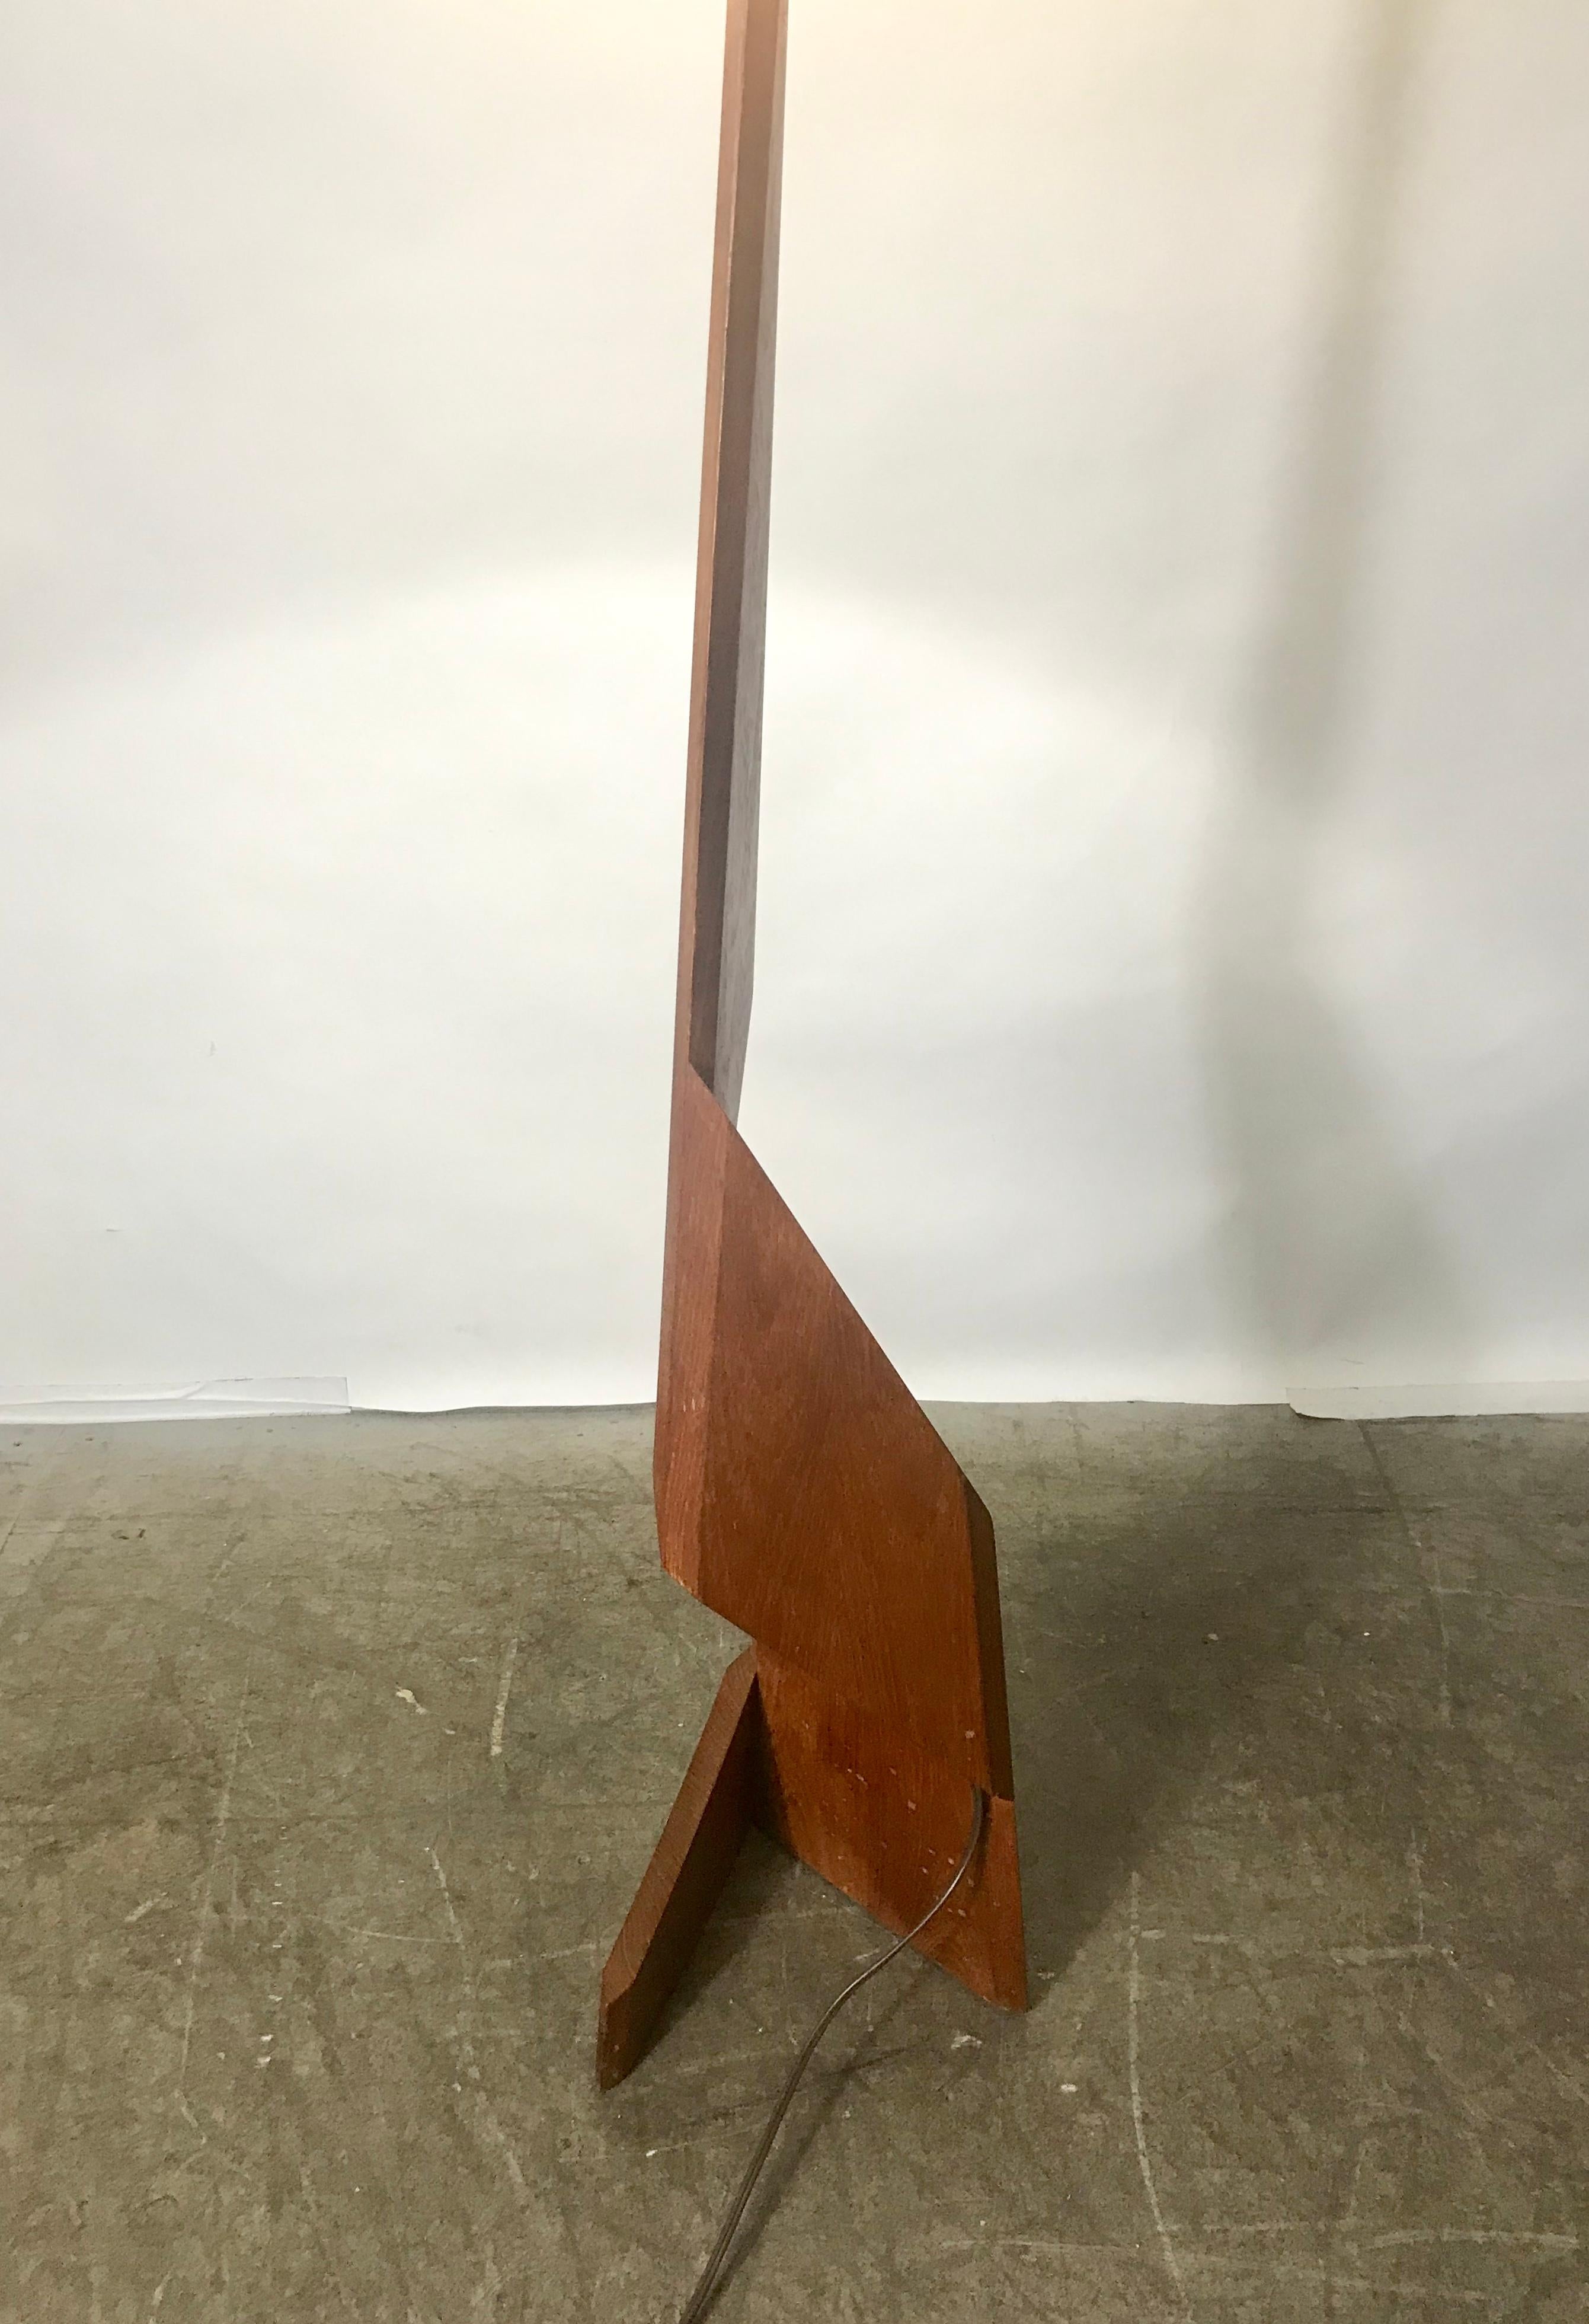 A uniquely designed Zig Zag teak floor lamp from the 1960s Danish Mid-Century Modern era. Amazing craftsmanship throughout featuring a sculpted geometrical solid teak base with original shade.